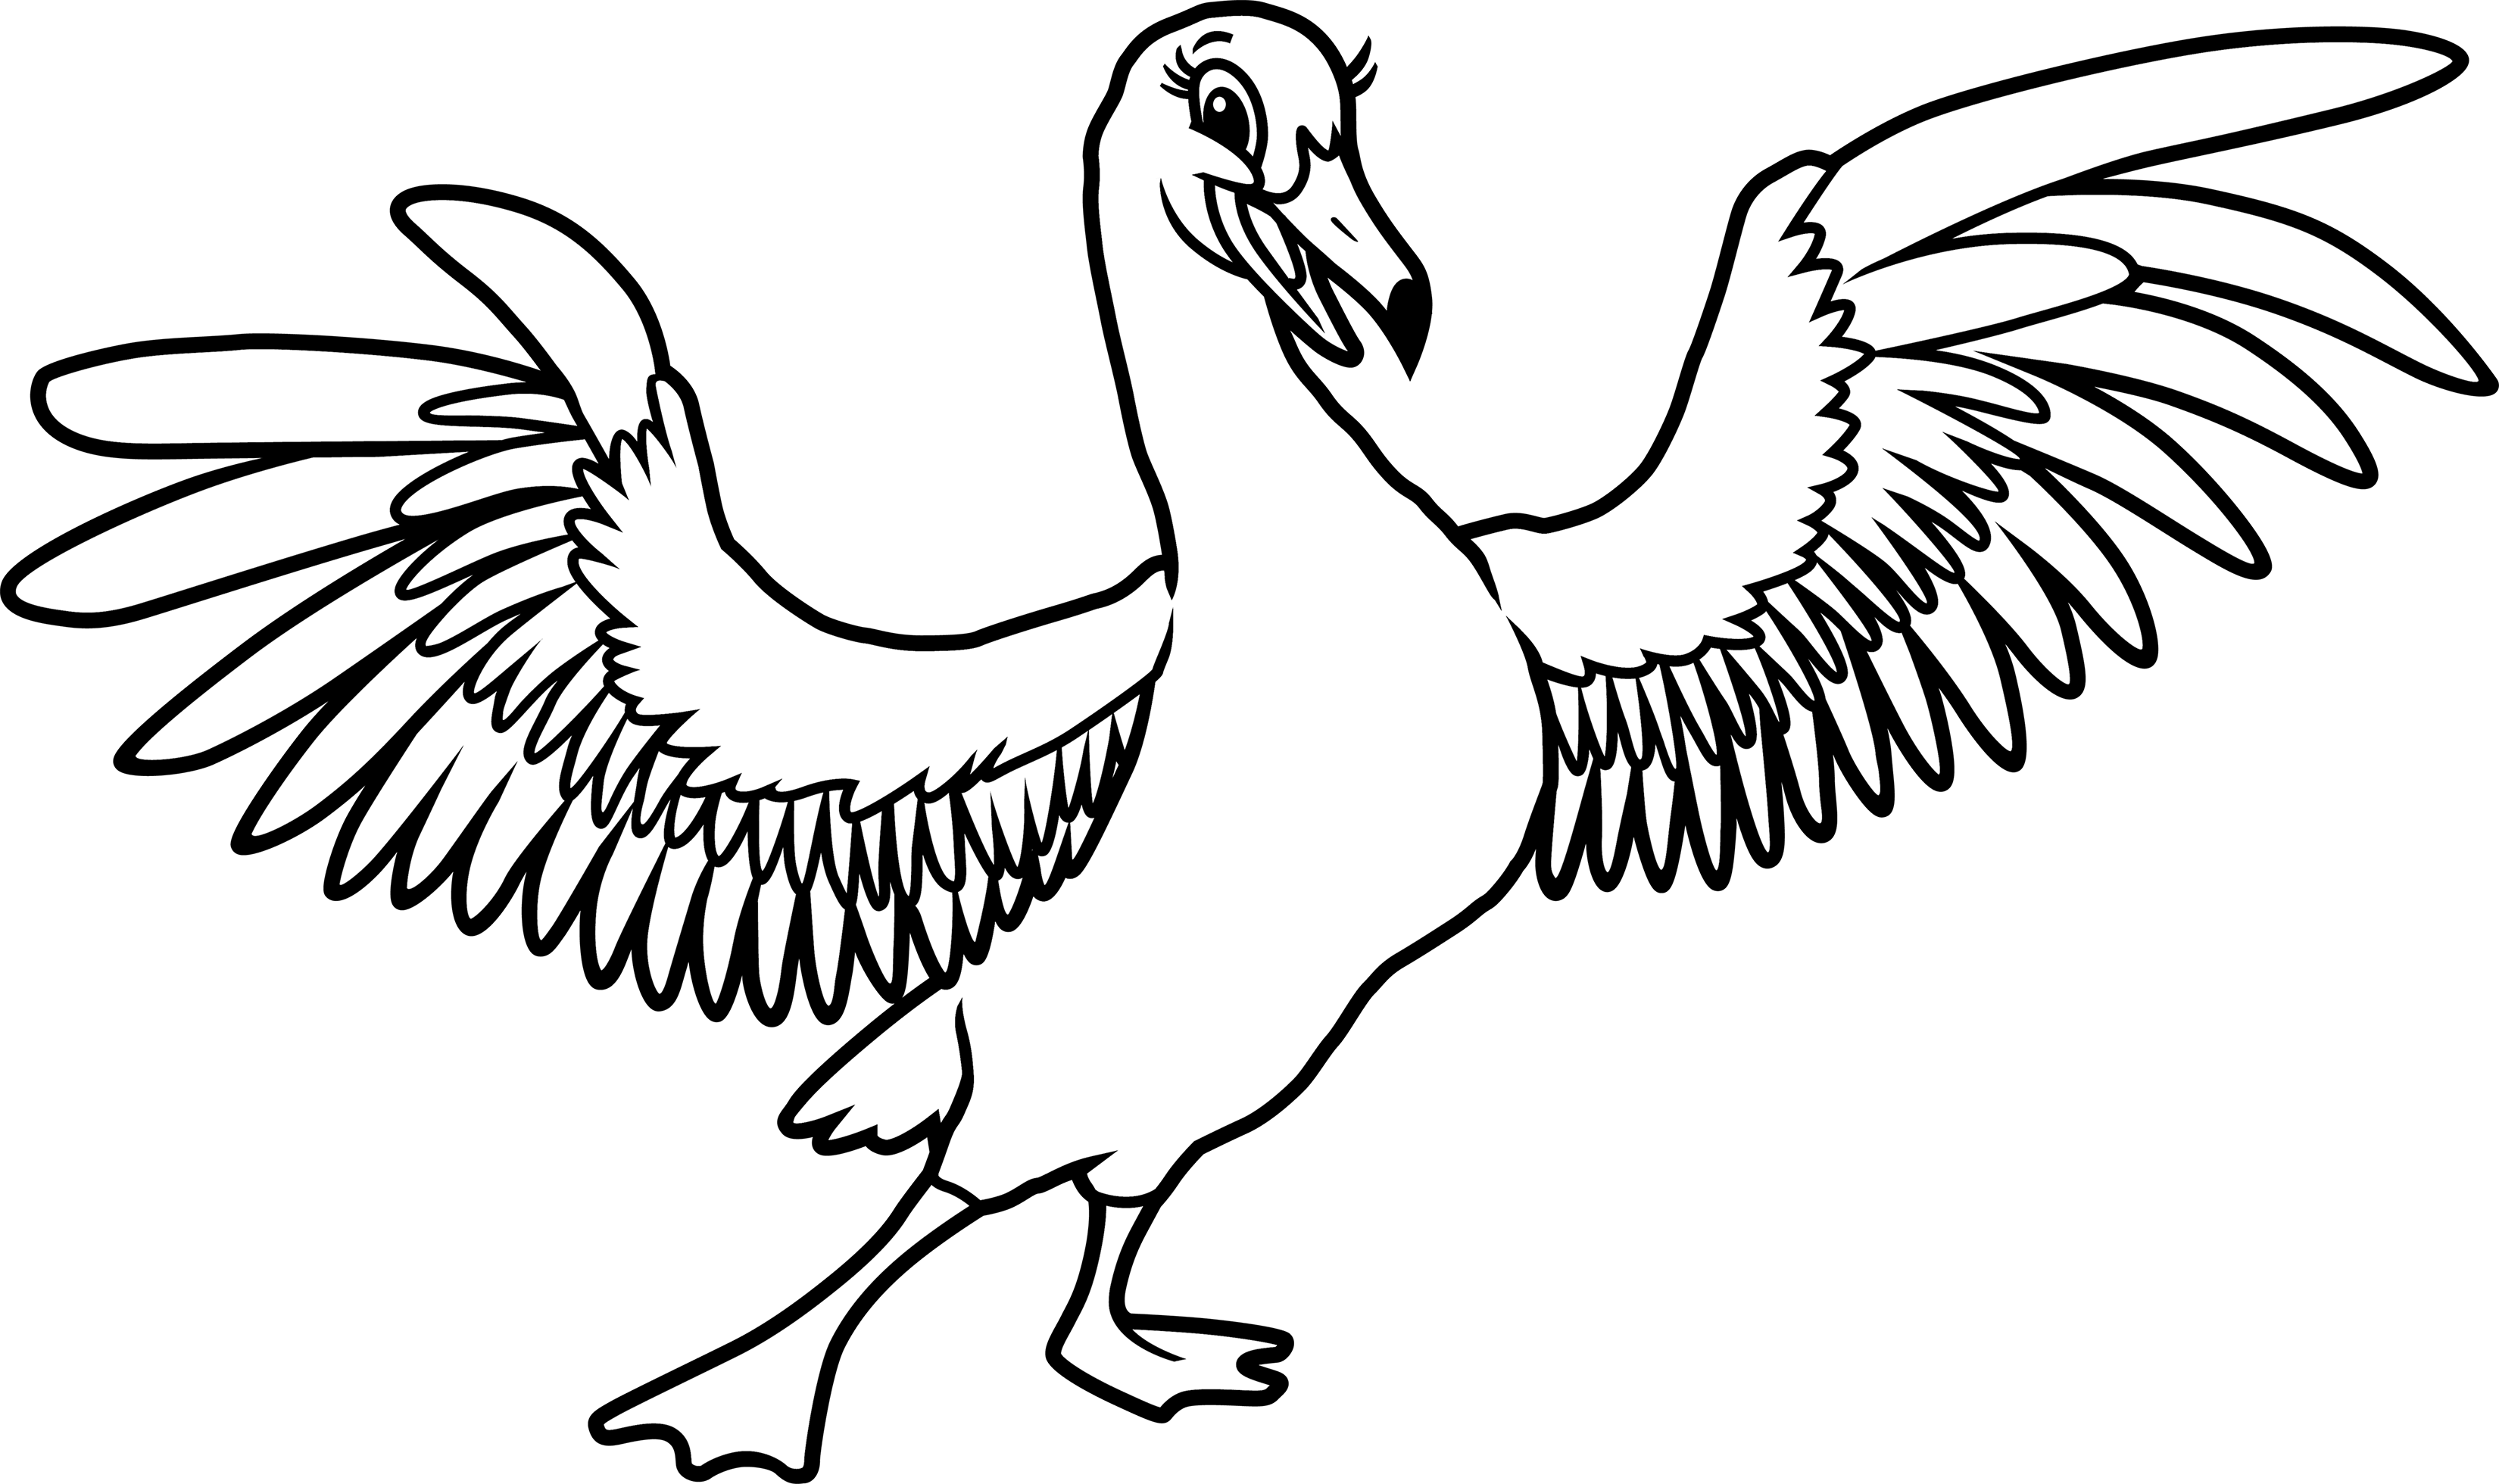 Pelican Spread Wings Illustration PNG image